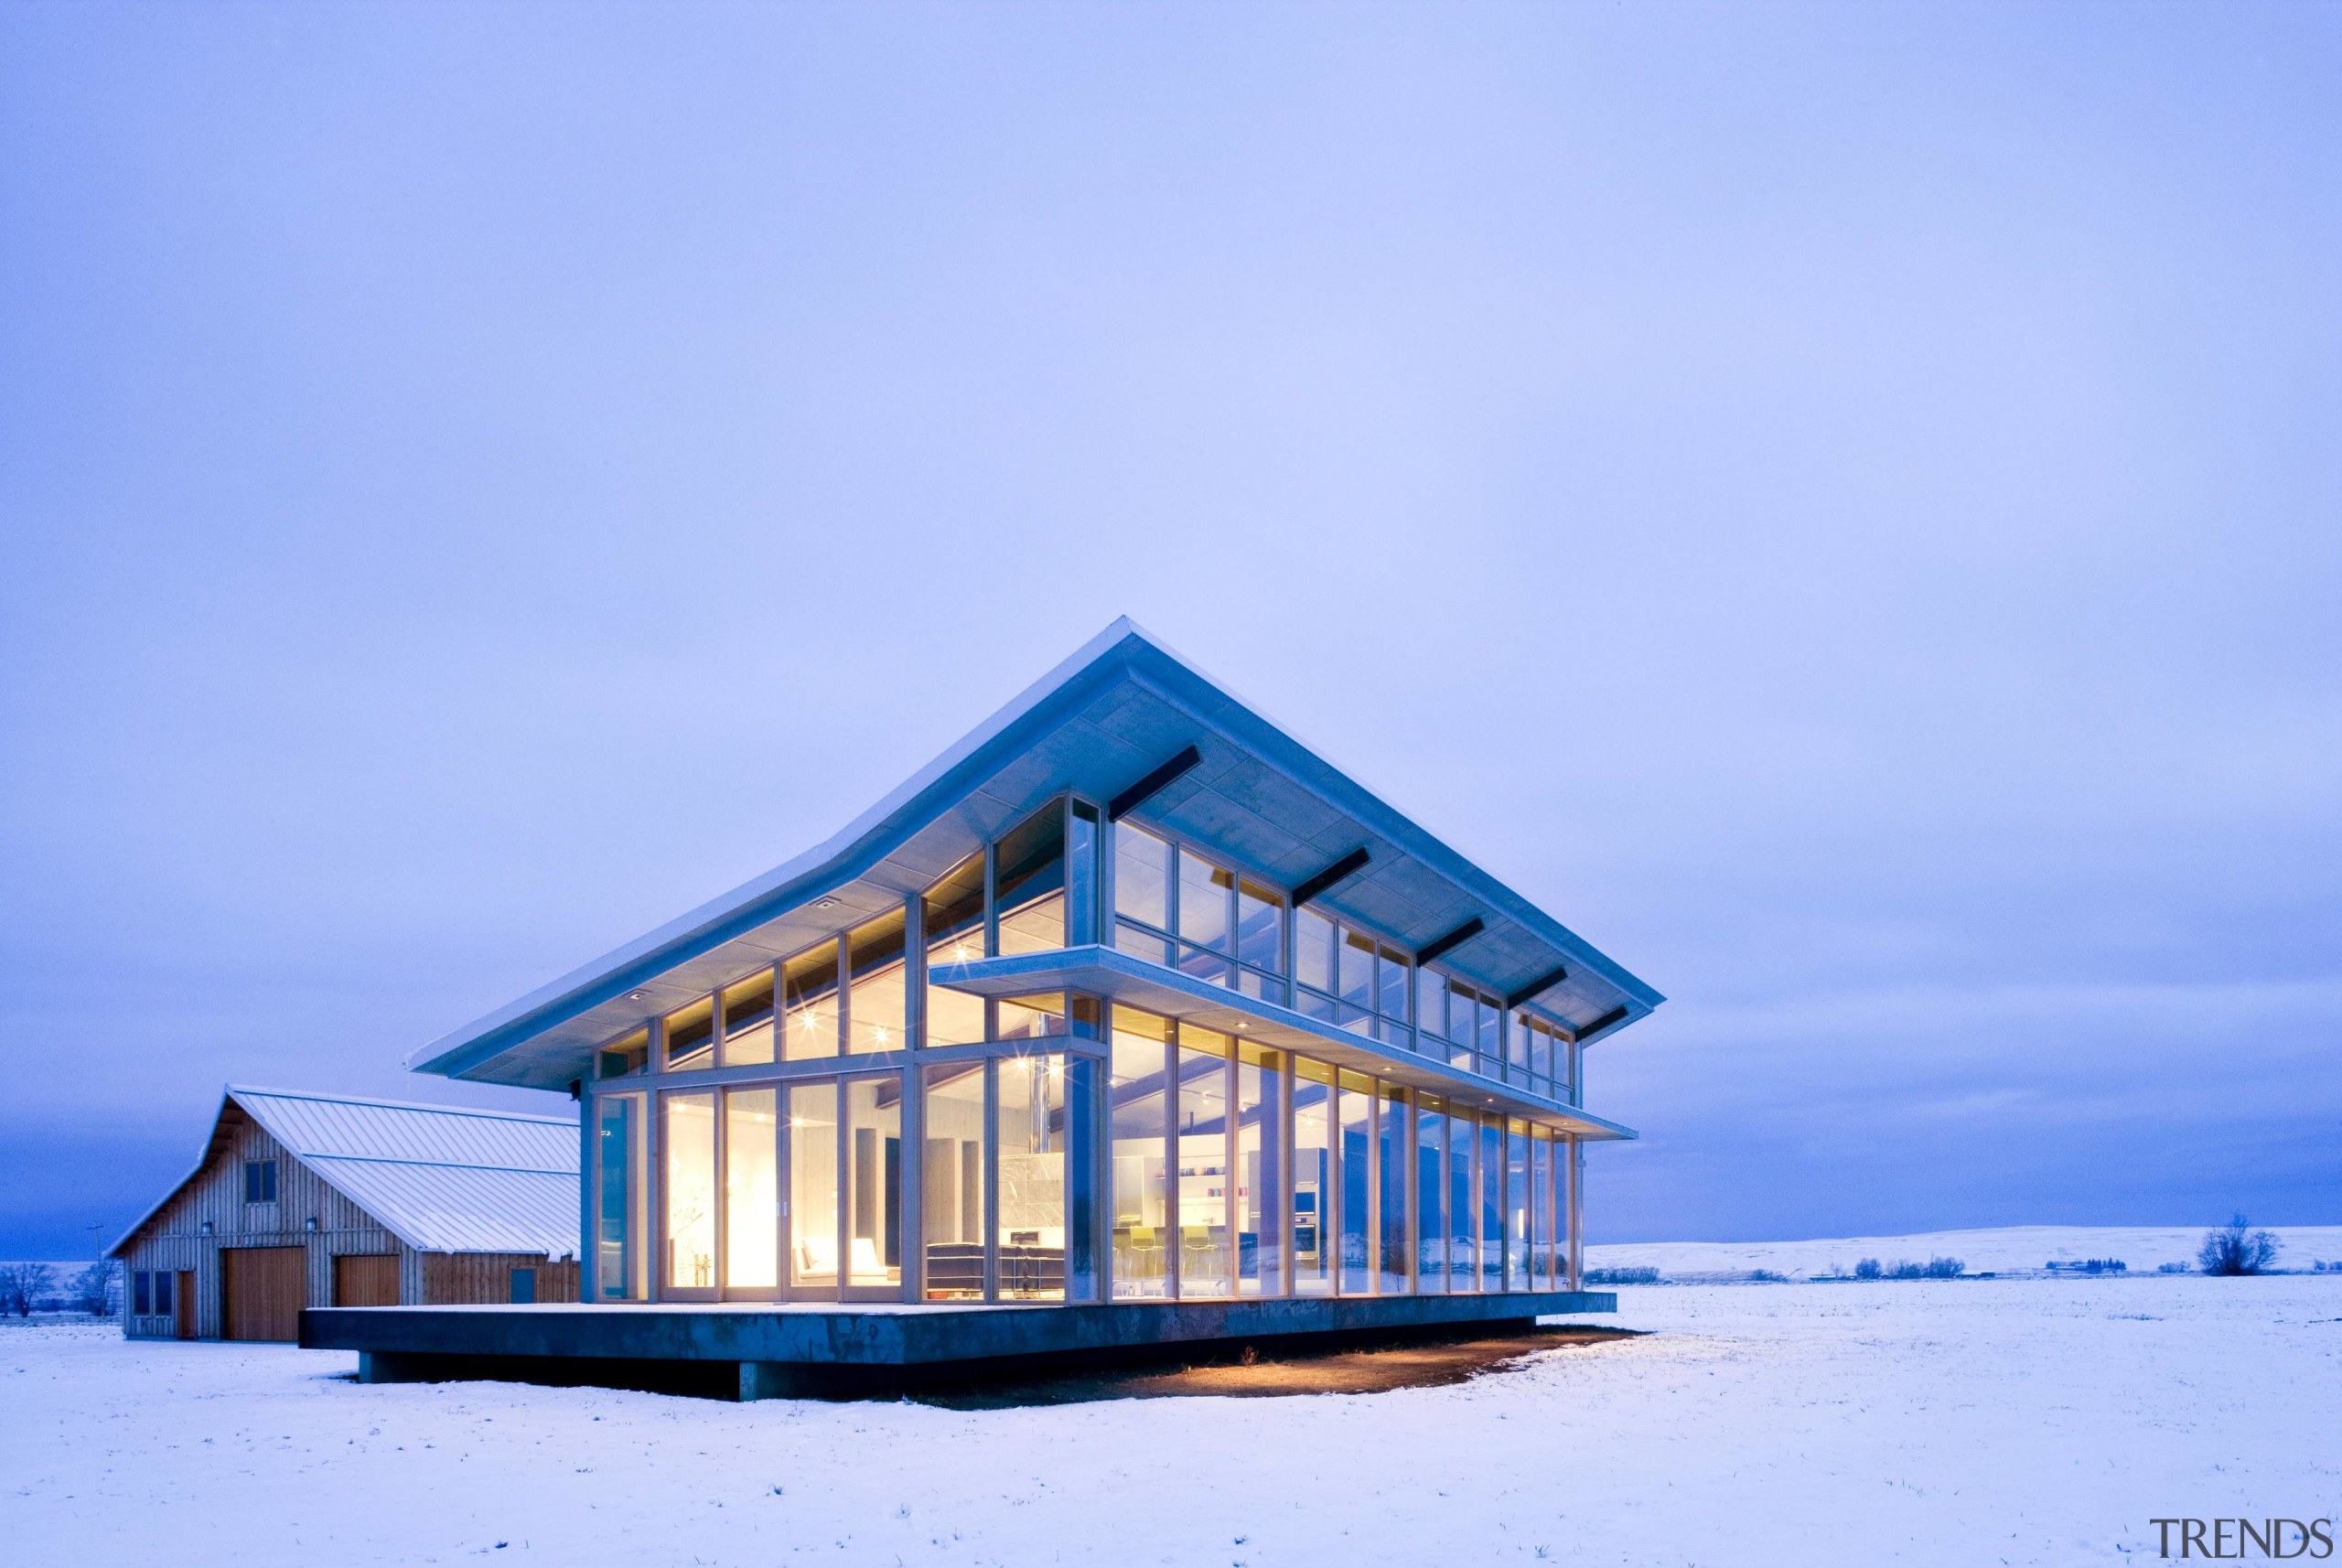  Architect: Olson Kundig Architects  architecture, arctic, building, cottage, home, house, sky, snow, winter, teal